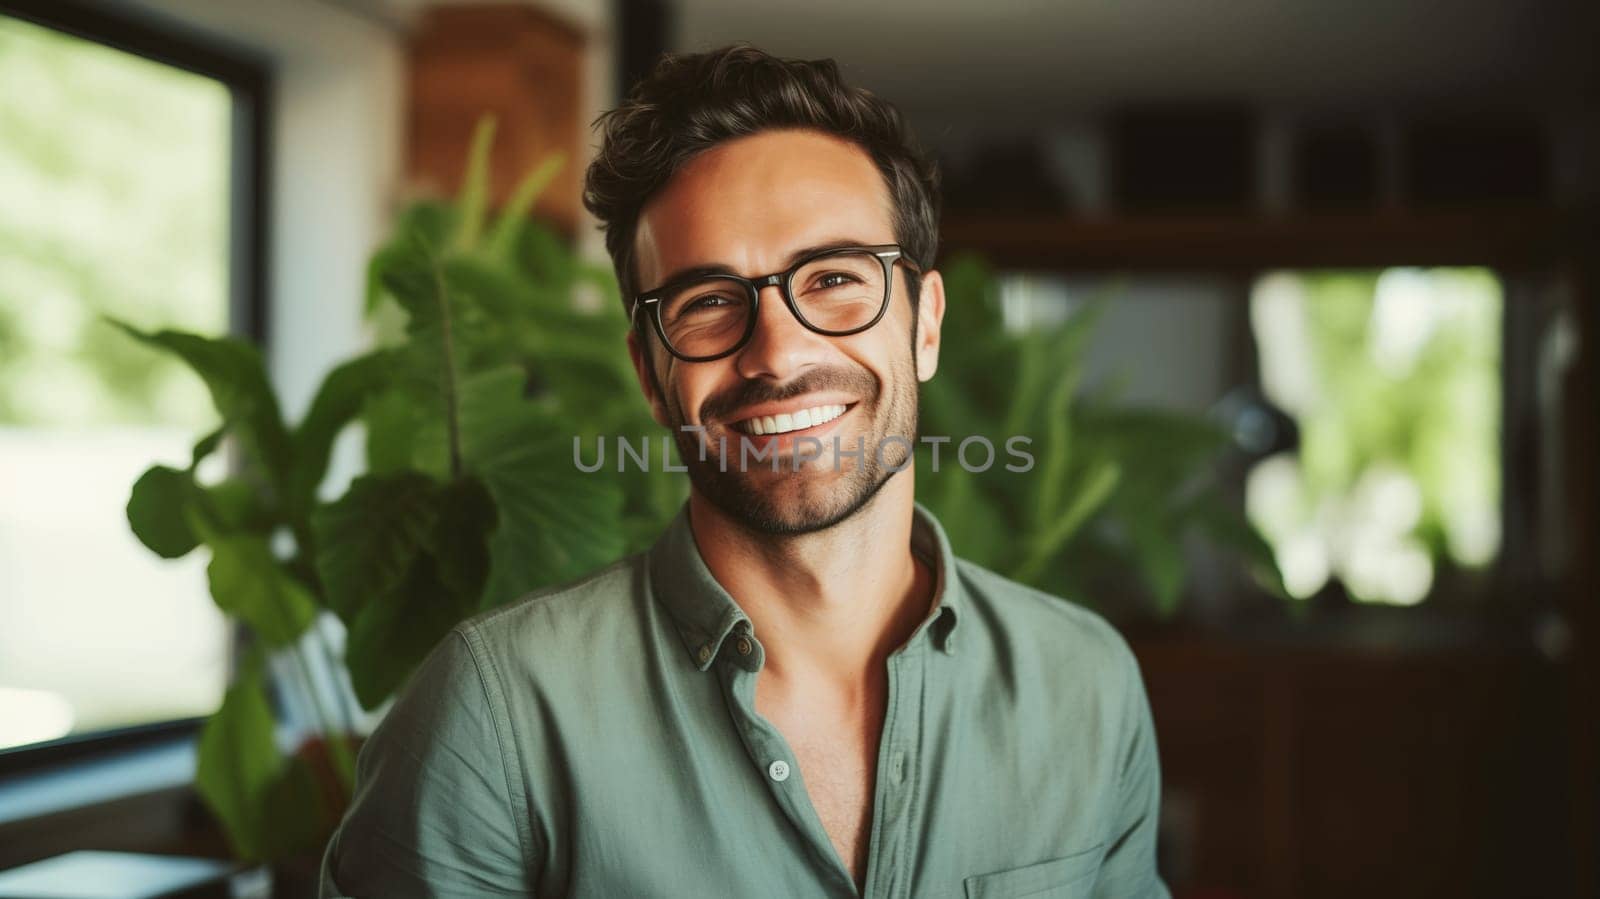 Portrait of happy smiling young man client in coffee house or cafe, looking at camera